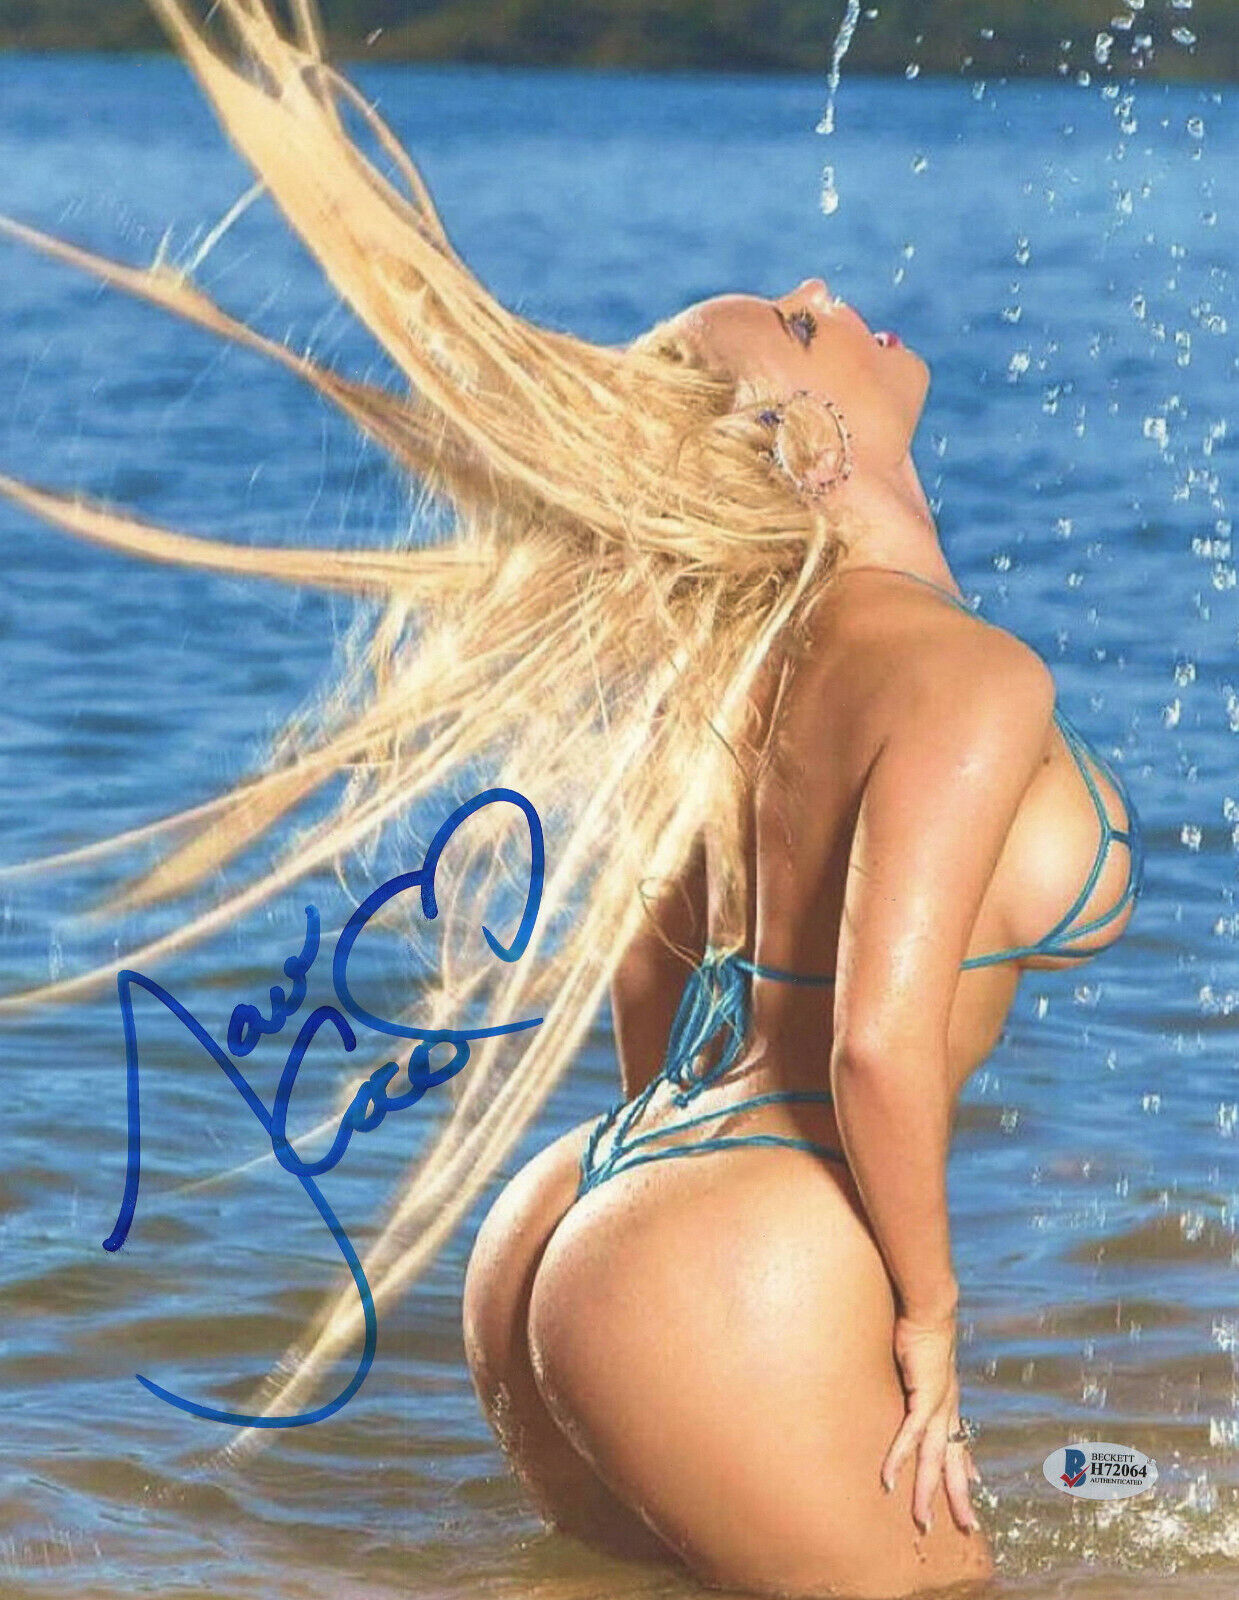 COCO AUSTIN SIGNED 11X14 PHOTO AUTOGRAPH BAS BECKETT ICE LOVES COCO ICE T 4